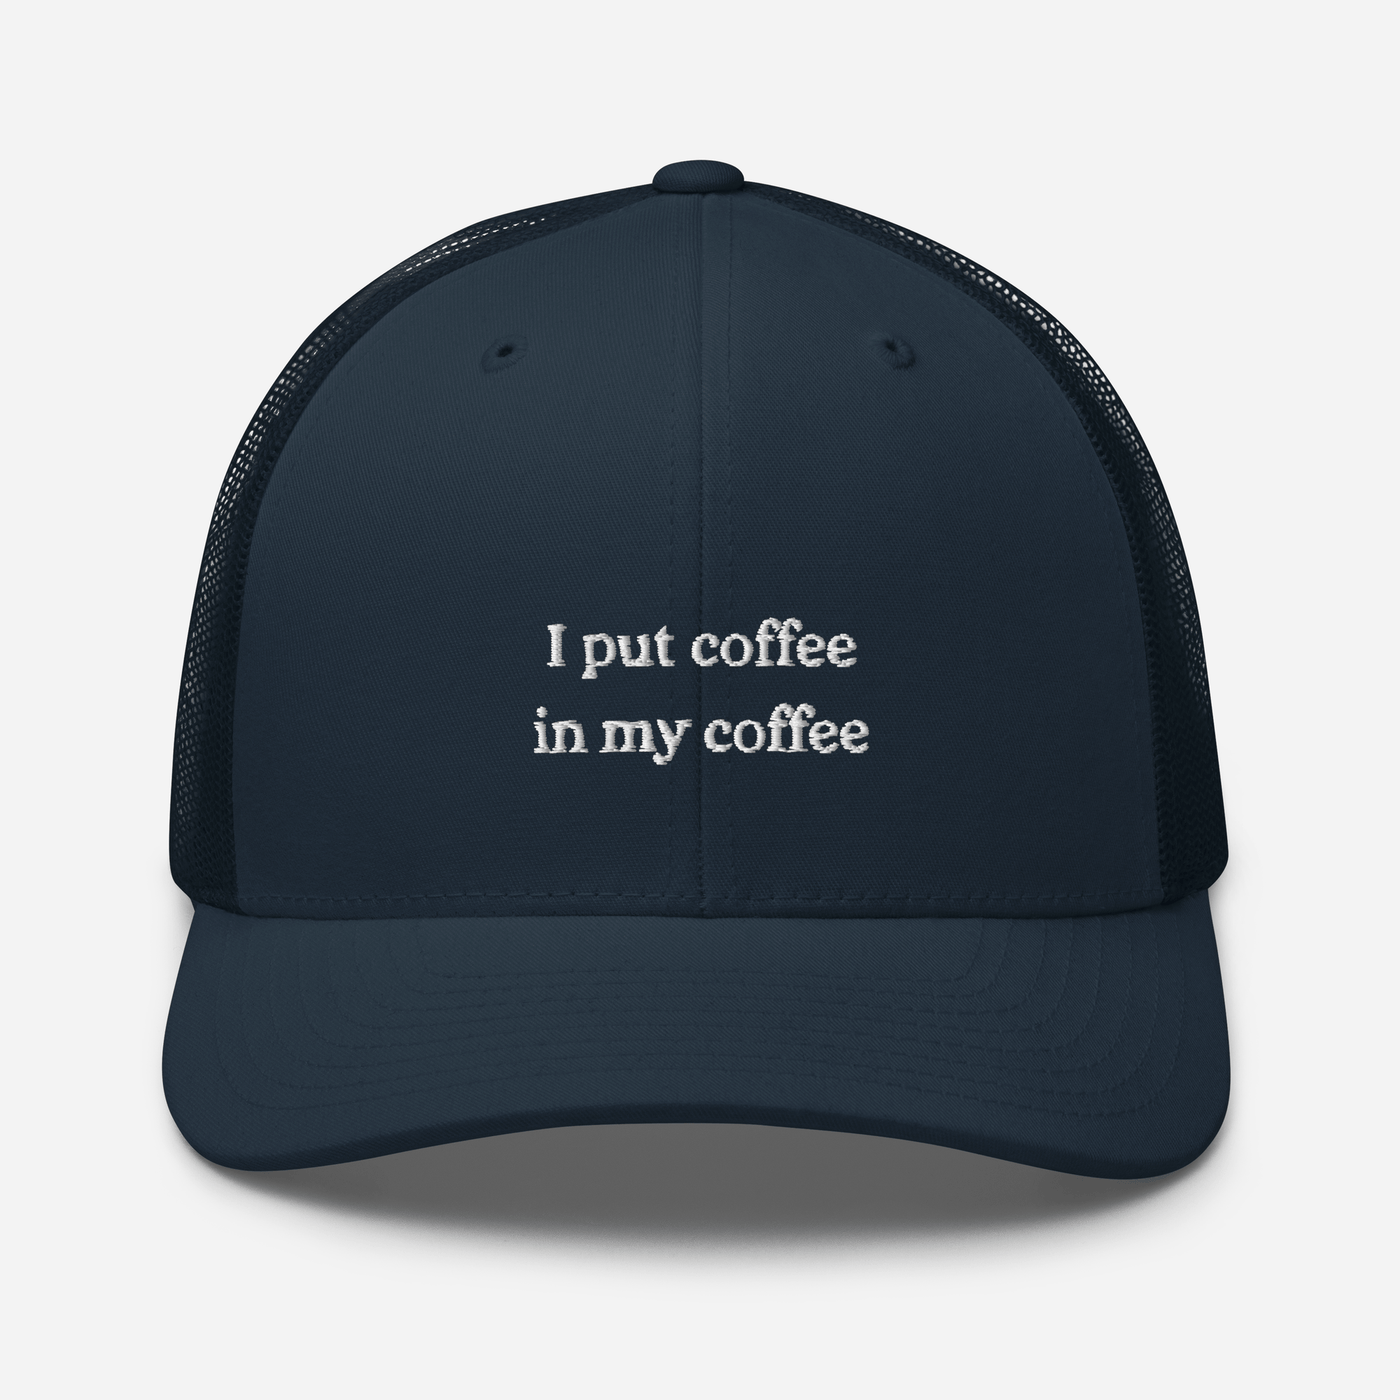 I put coffee in my coffee Trucker Cap - Navy - - Just Another Cap Store